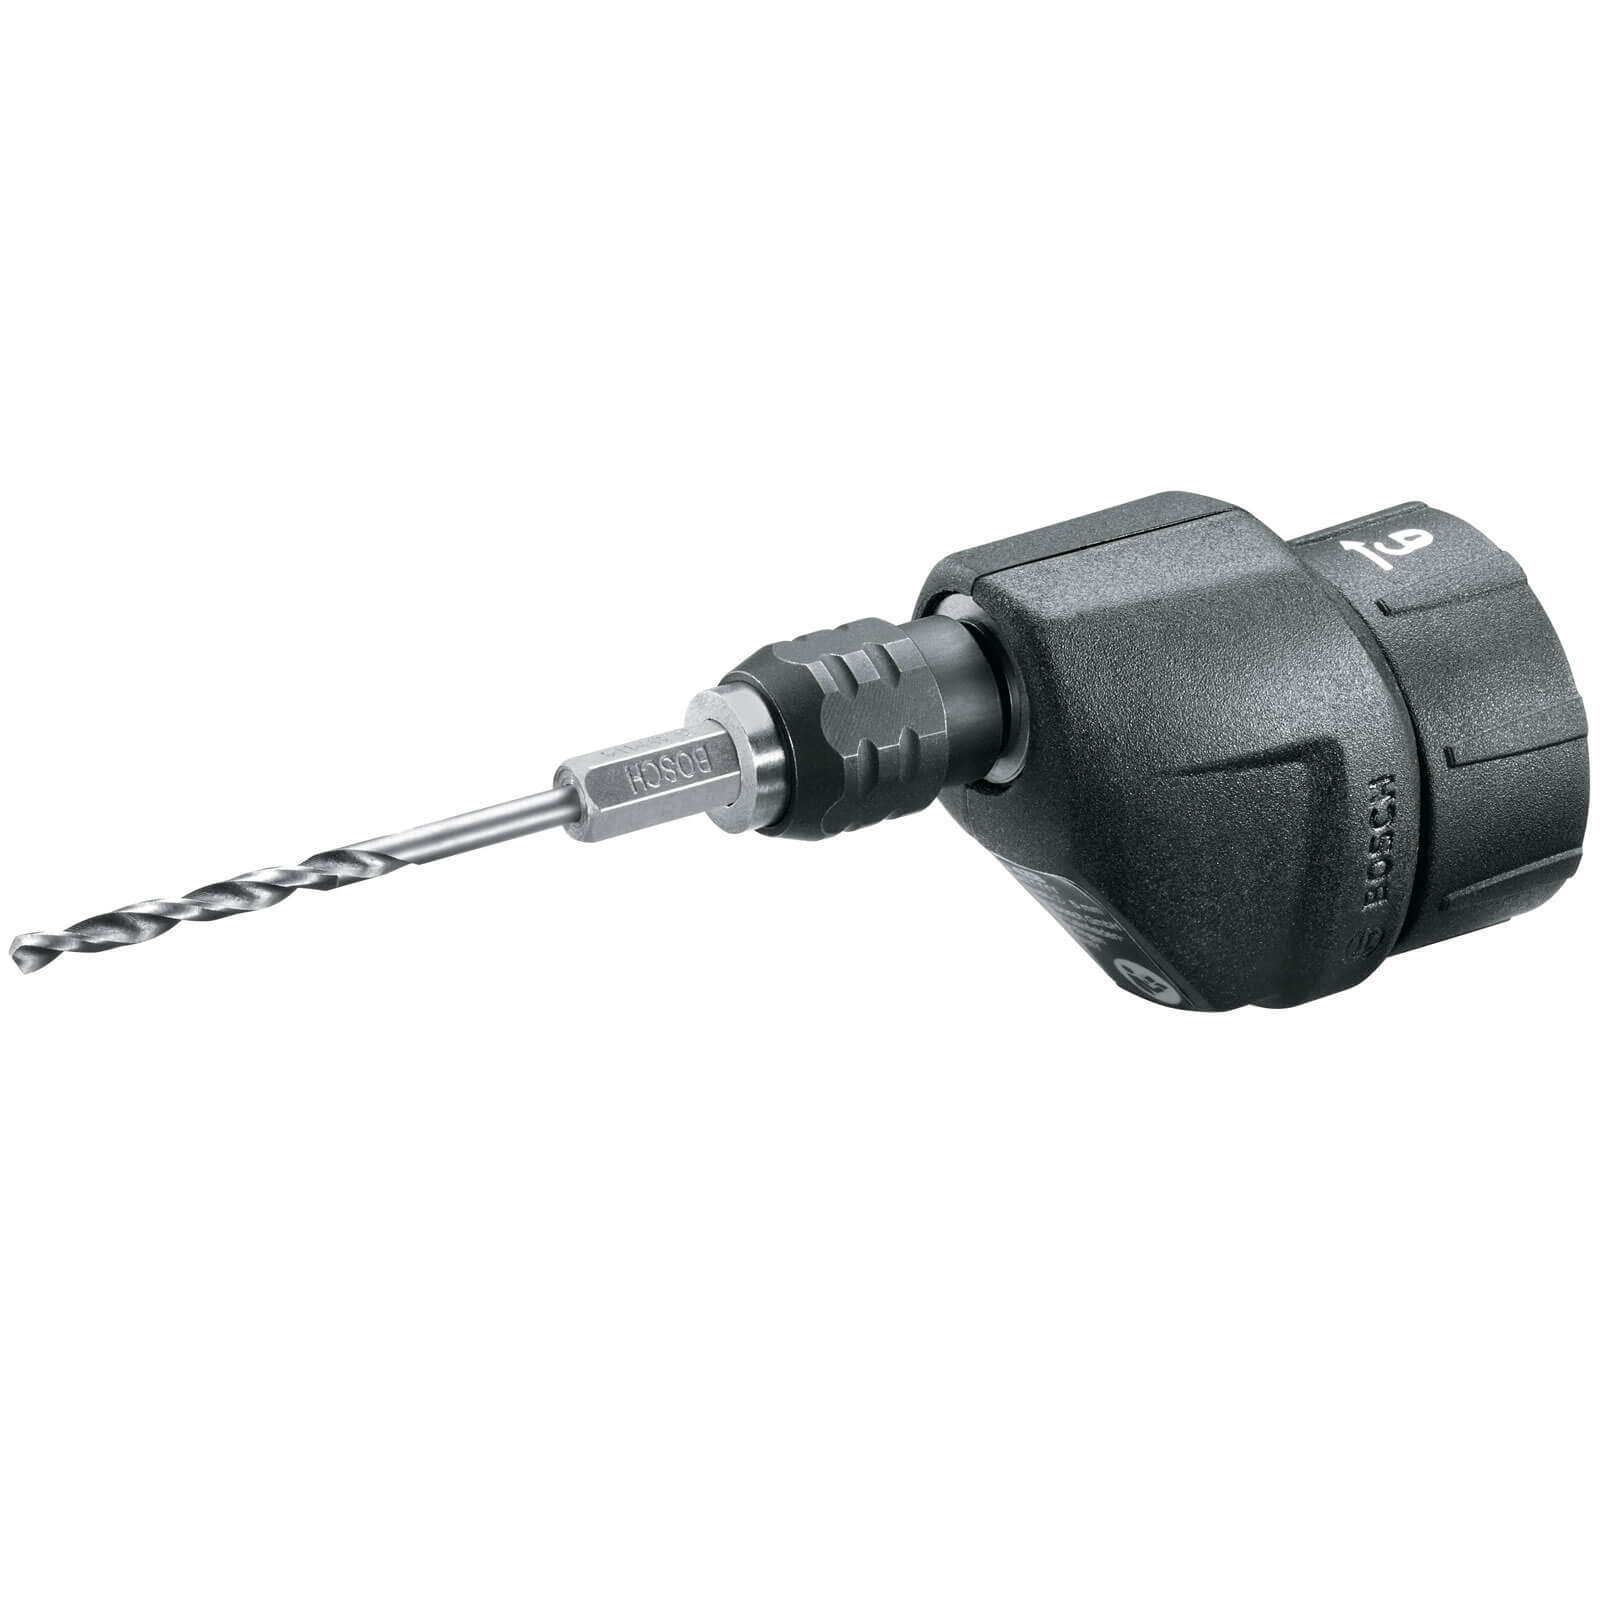 Image of Bosch Drill Adapter for IXO Screwdrivers